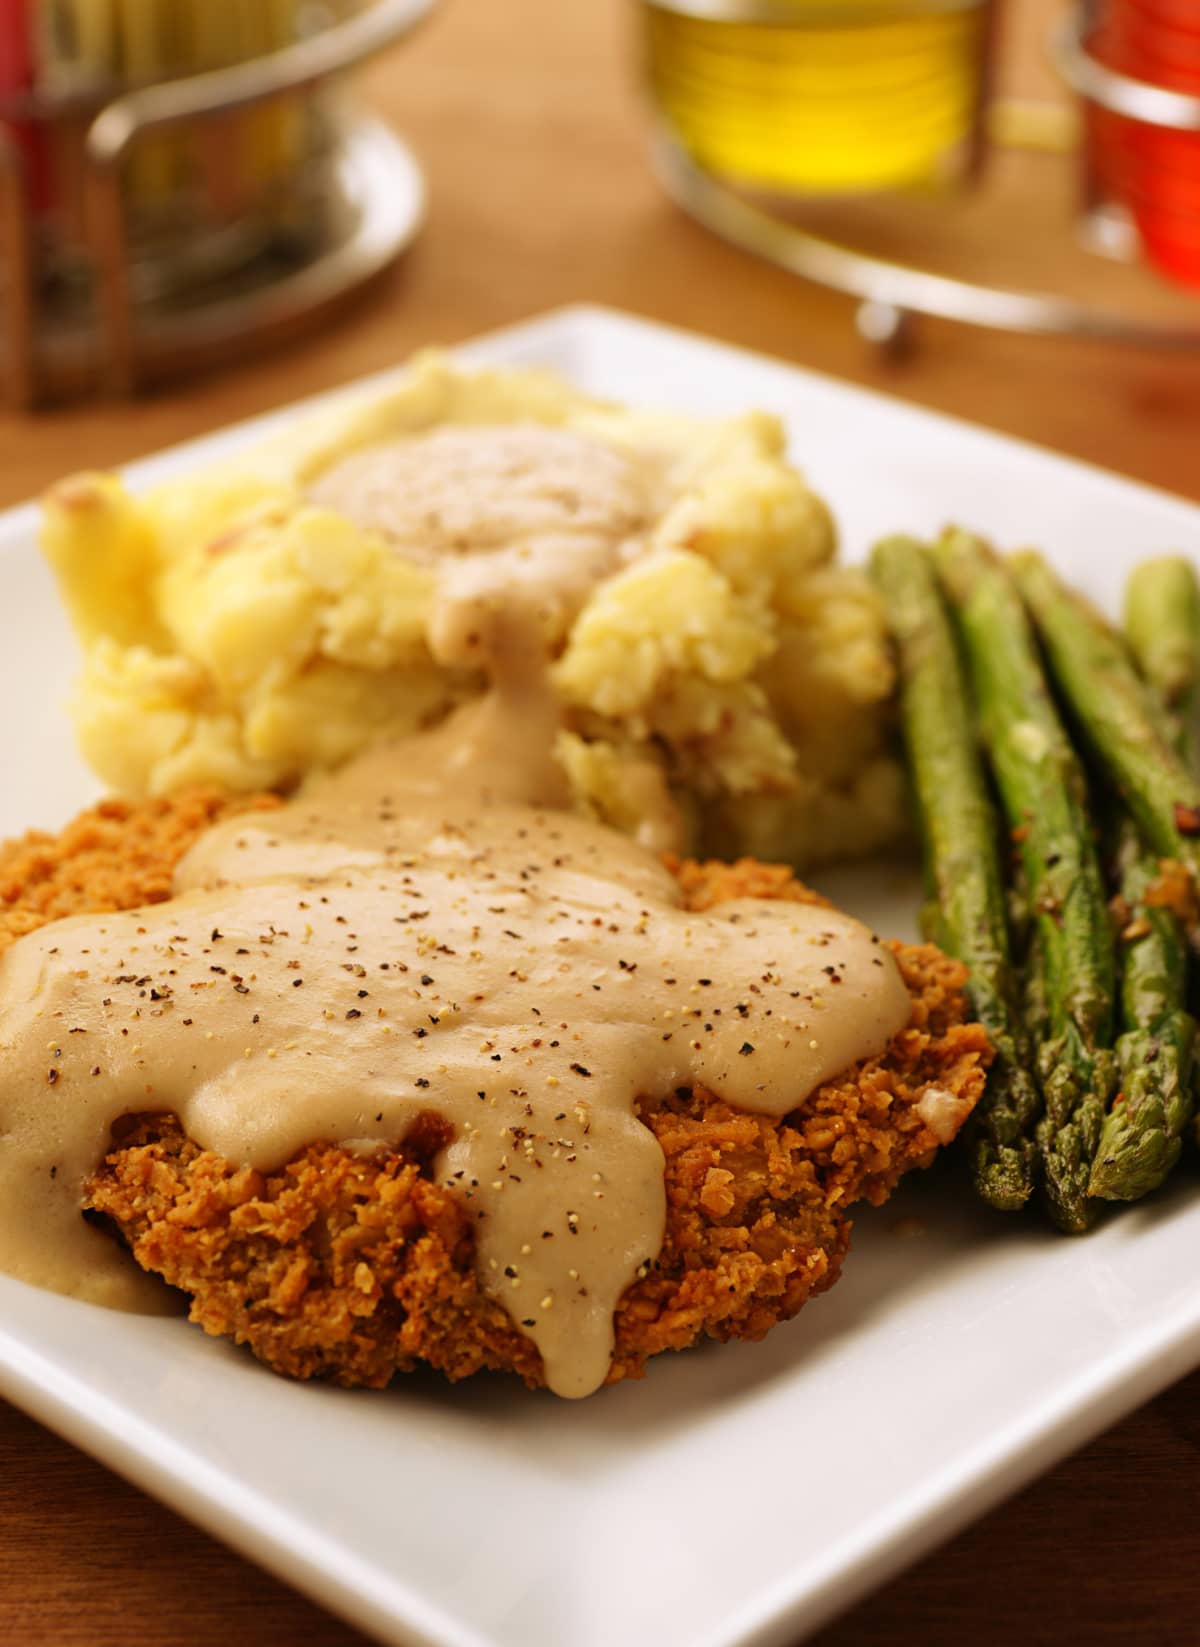 "Chicken fried steak, aka country fried steak, with mashed Yukon gold potatoes, gravy and asparagus."